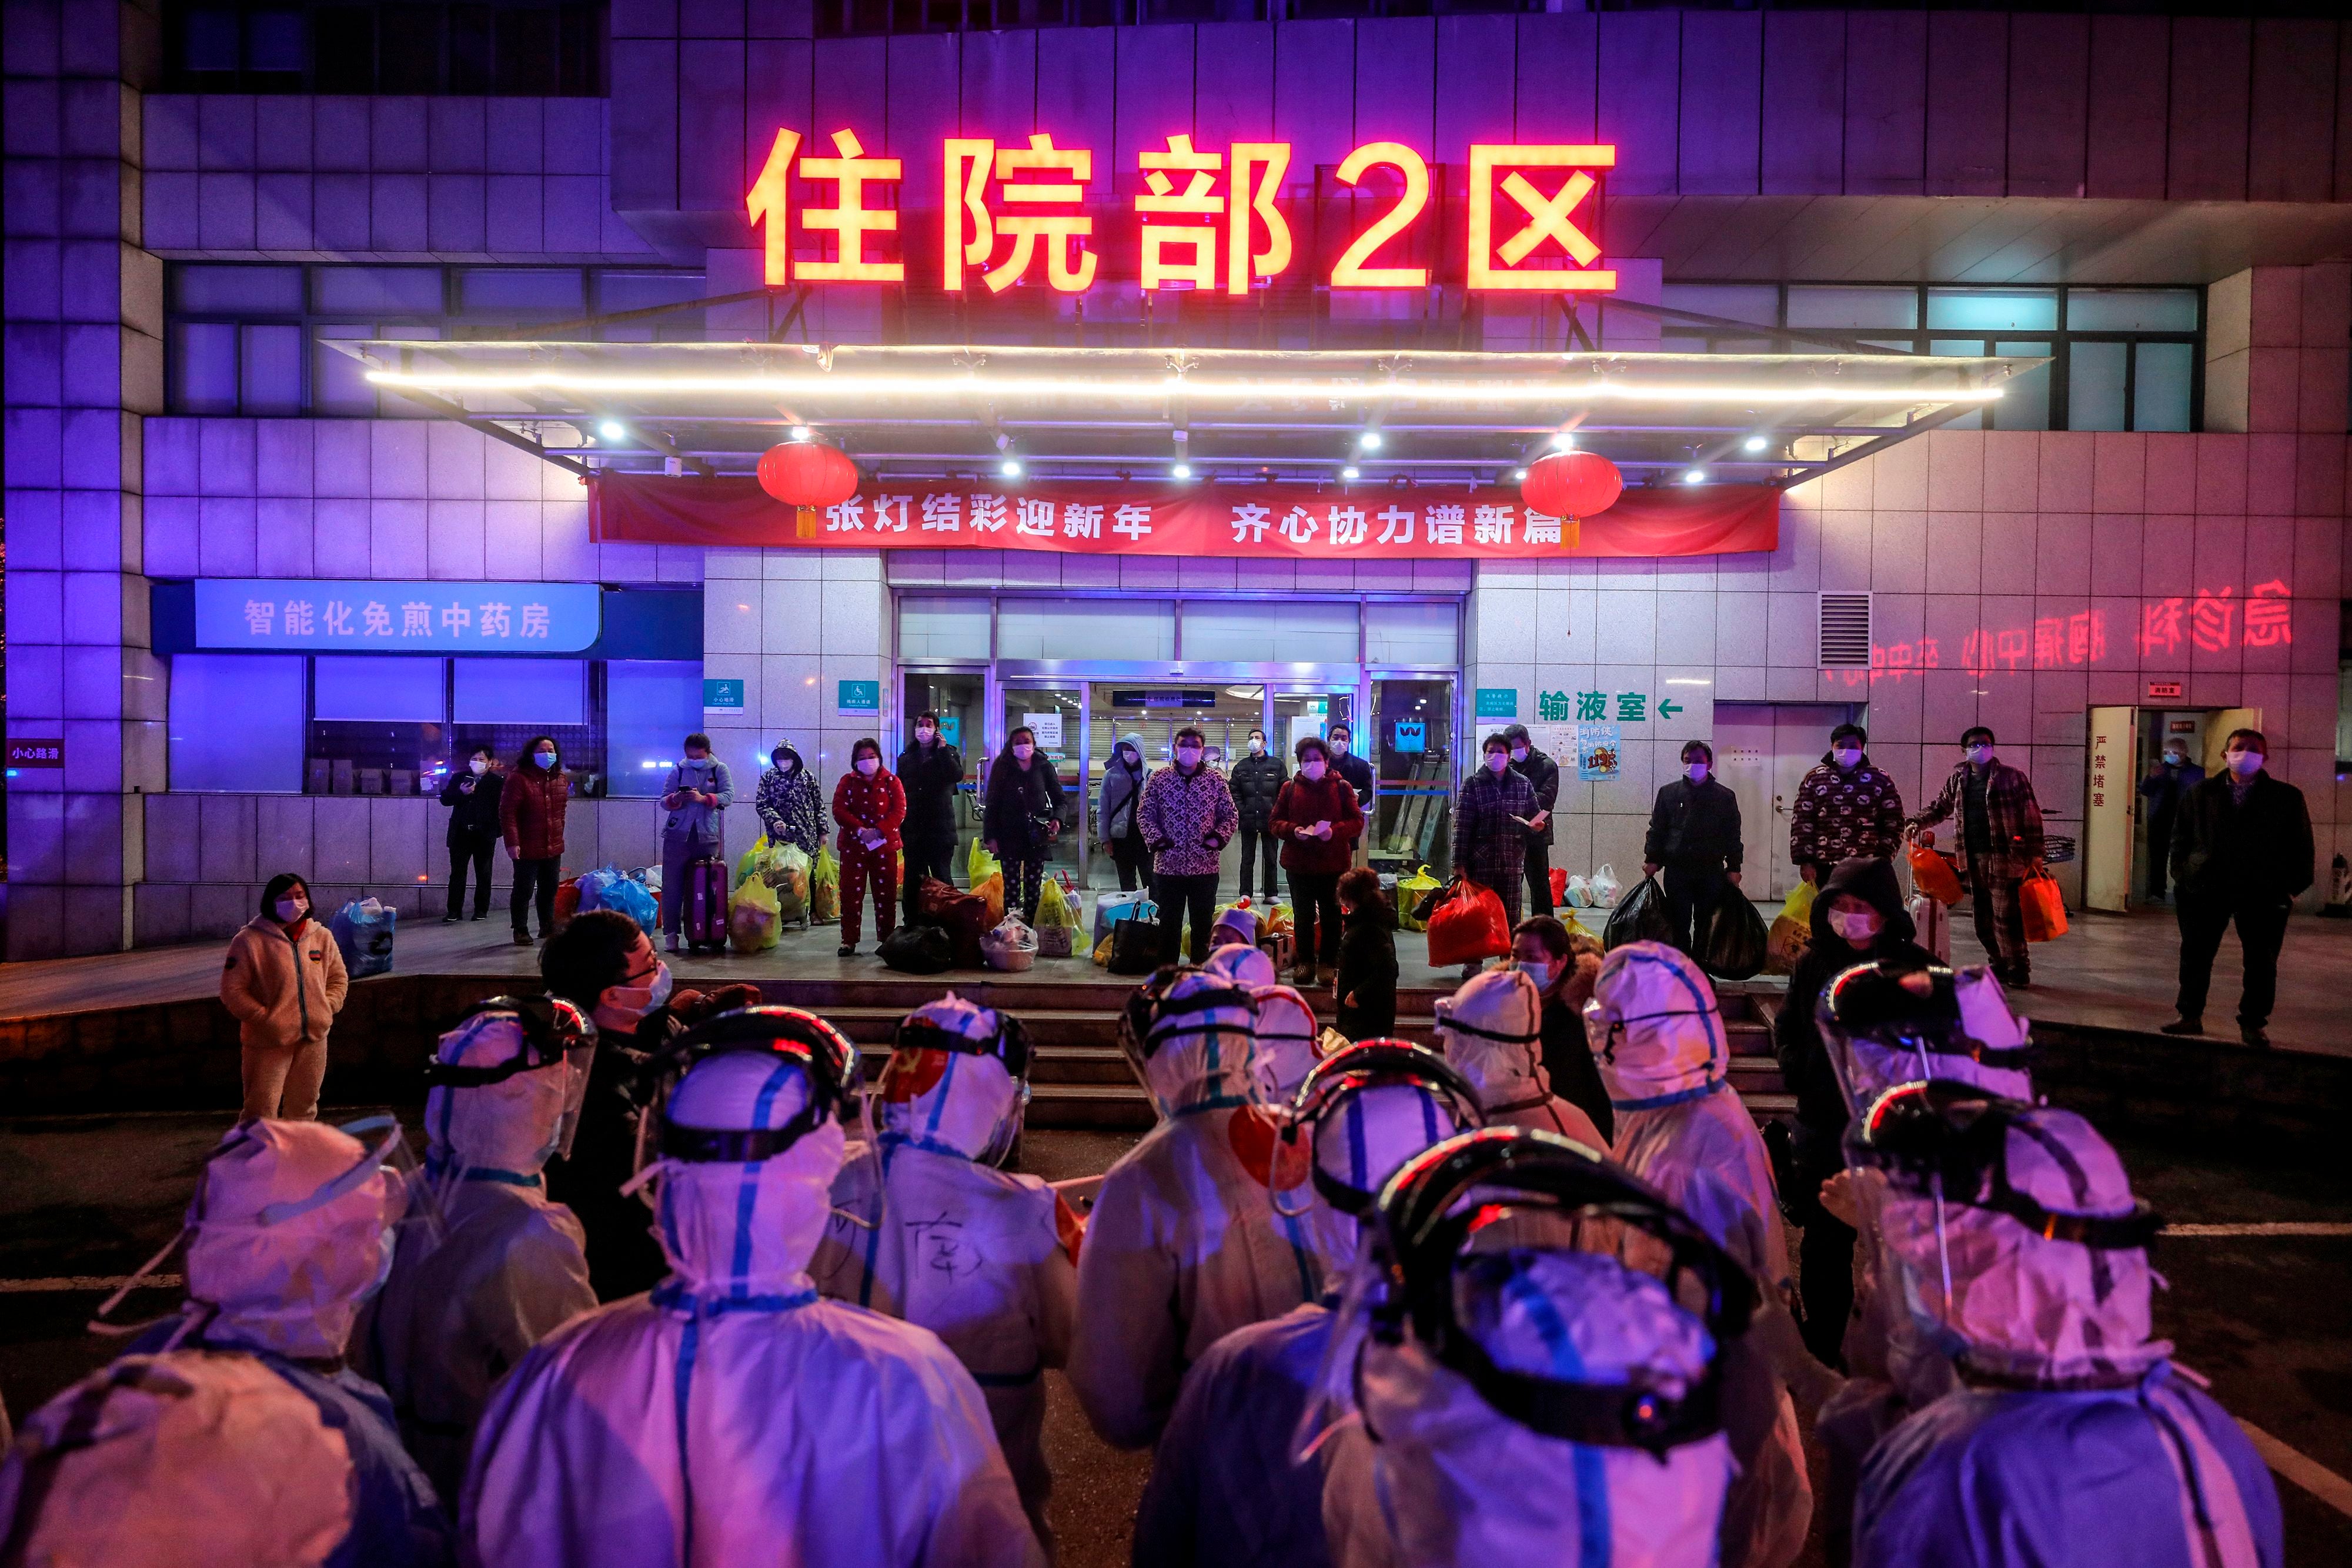 Infected patients were transferred to the newly built hospital in Wuhan&nbsp;